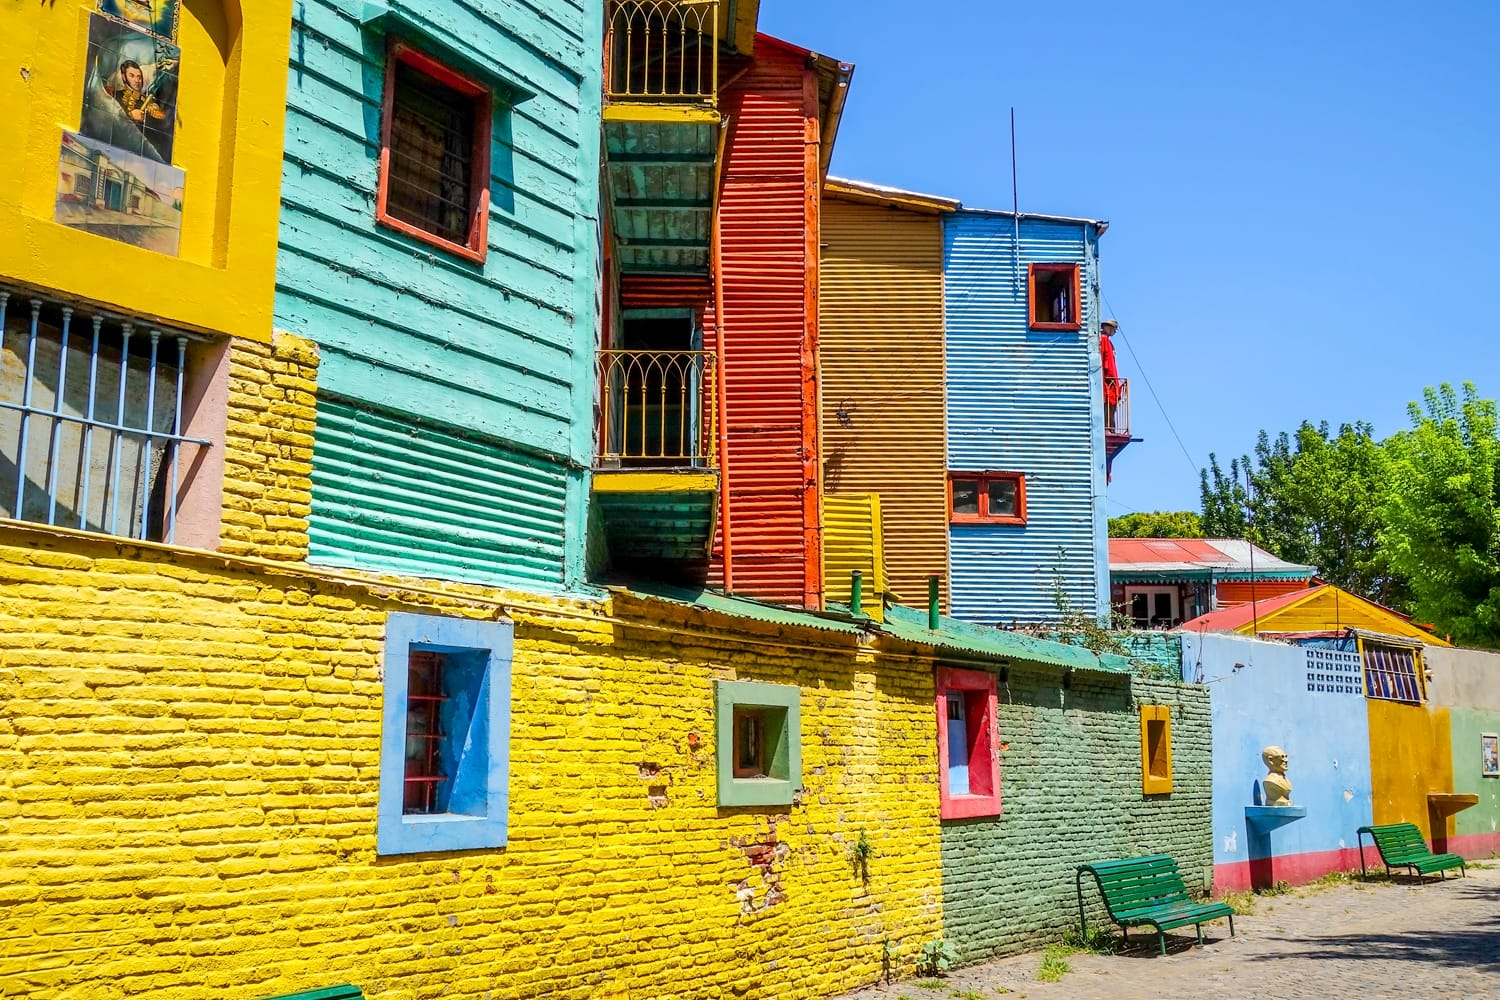 Colorful houses in Caminito, Buenos Aires, Argentina